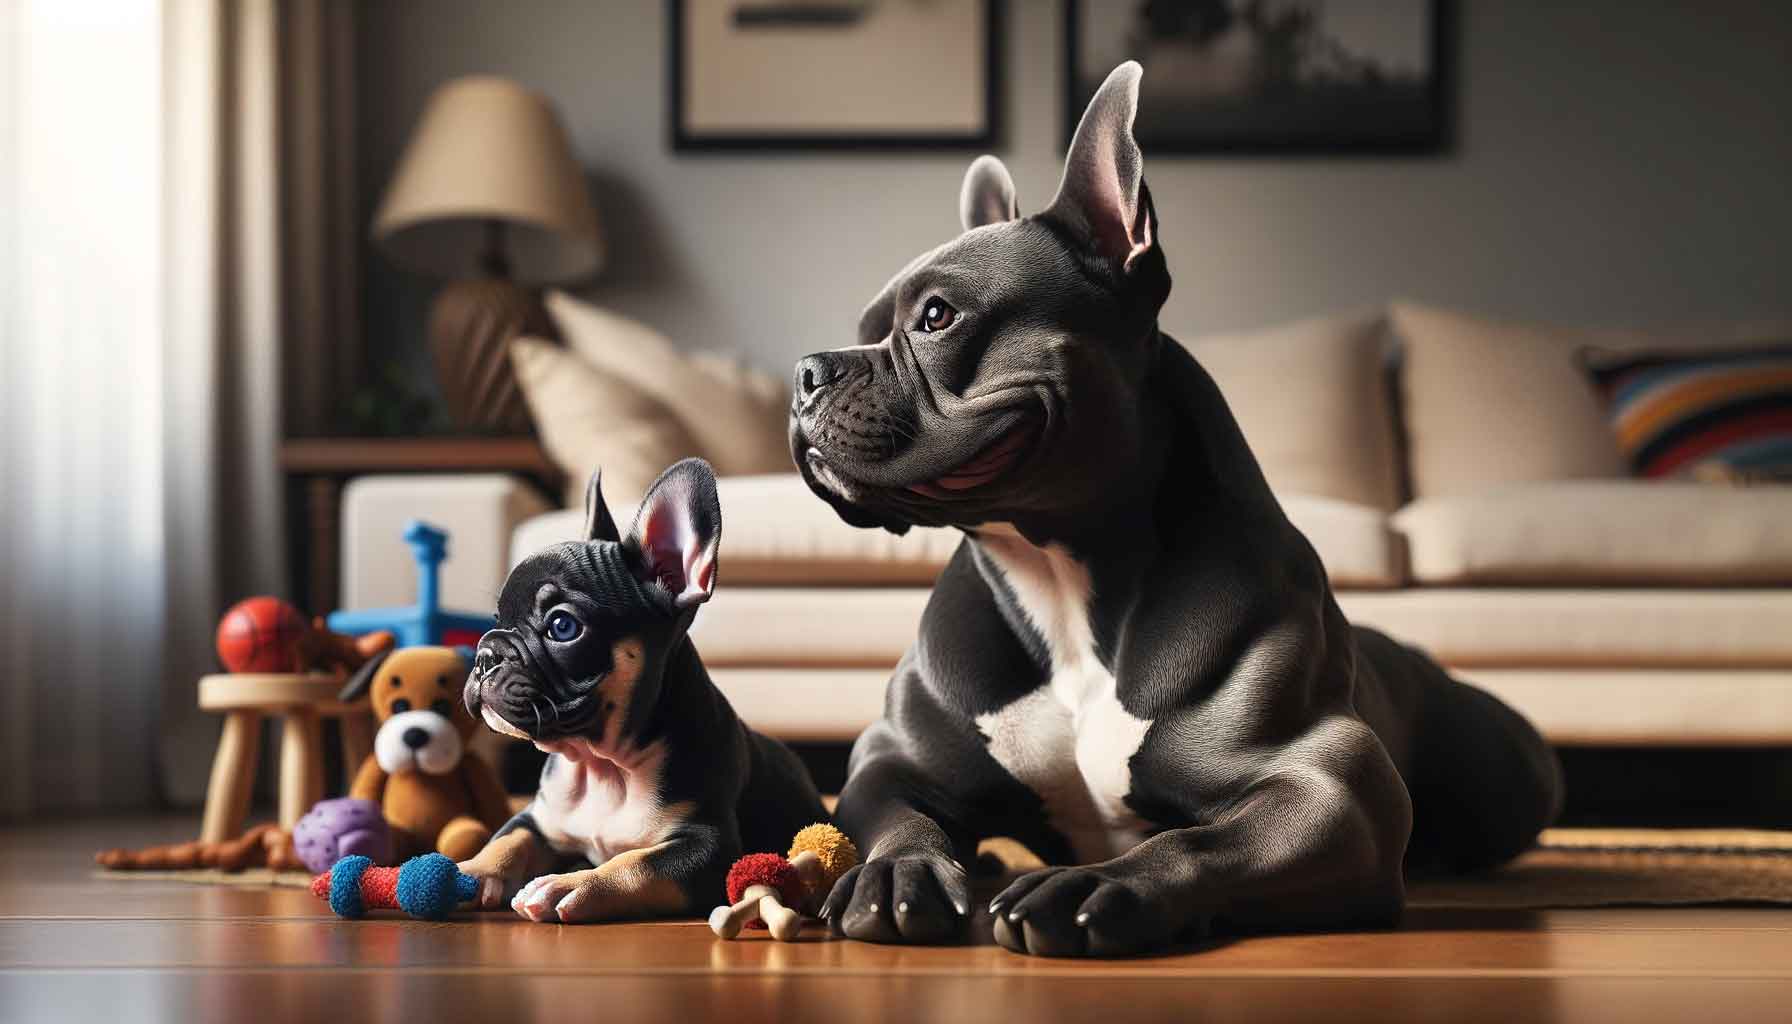 A photograph depicting a micro bully and a French bulldog in profile in a family living room. The micro bully's muscle tone and agility contrast with the French bulldog's relaxed posture. The scene with toys scattered around conveys their adaptability and companionship qualities, showcasing the contrast and harmony between the two breeds in a domestic setting.